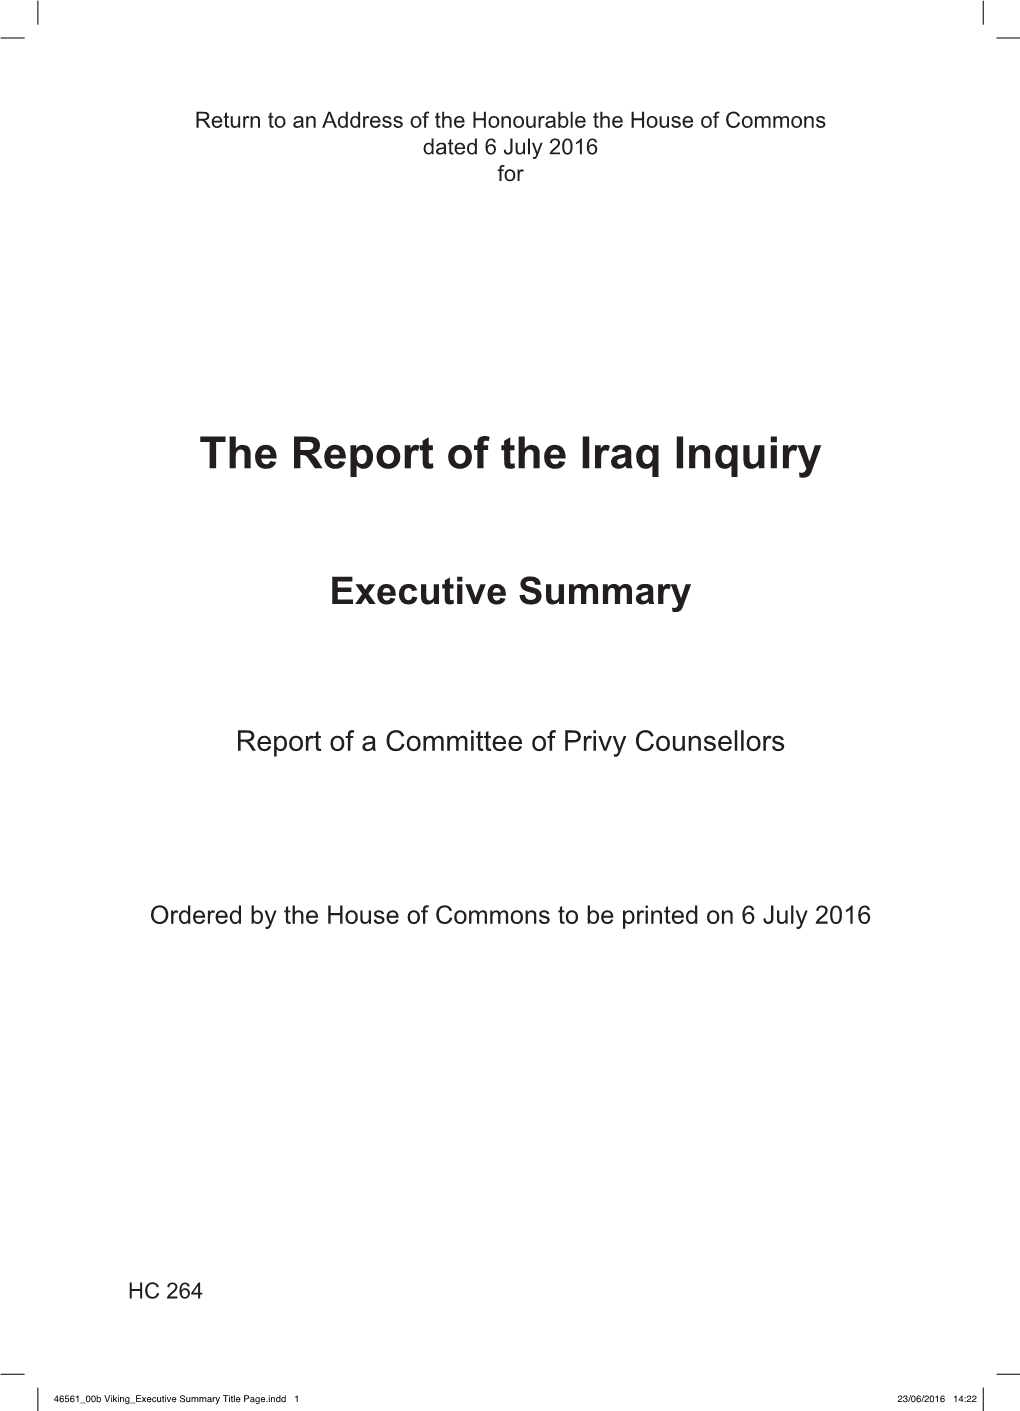 The Report of the Iraq Inquiry: Executive Summary